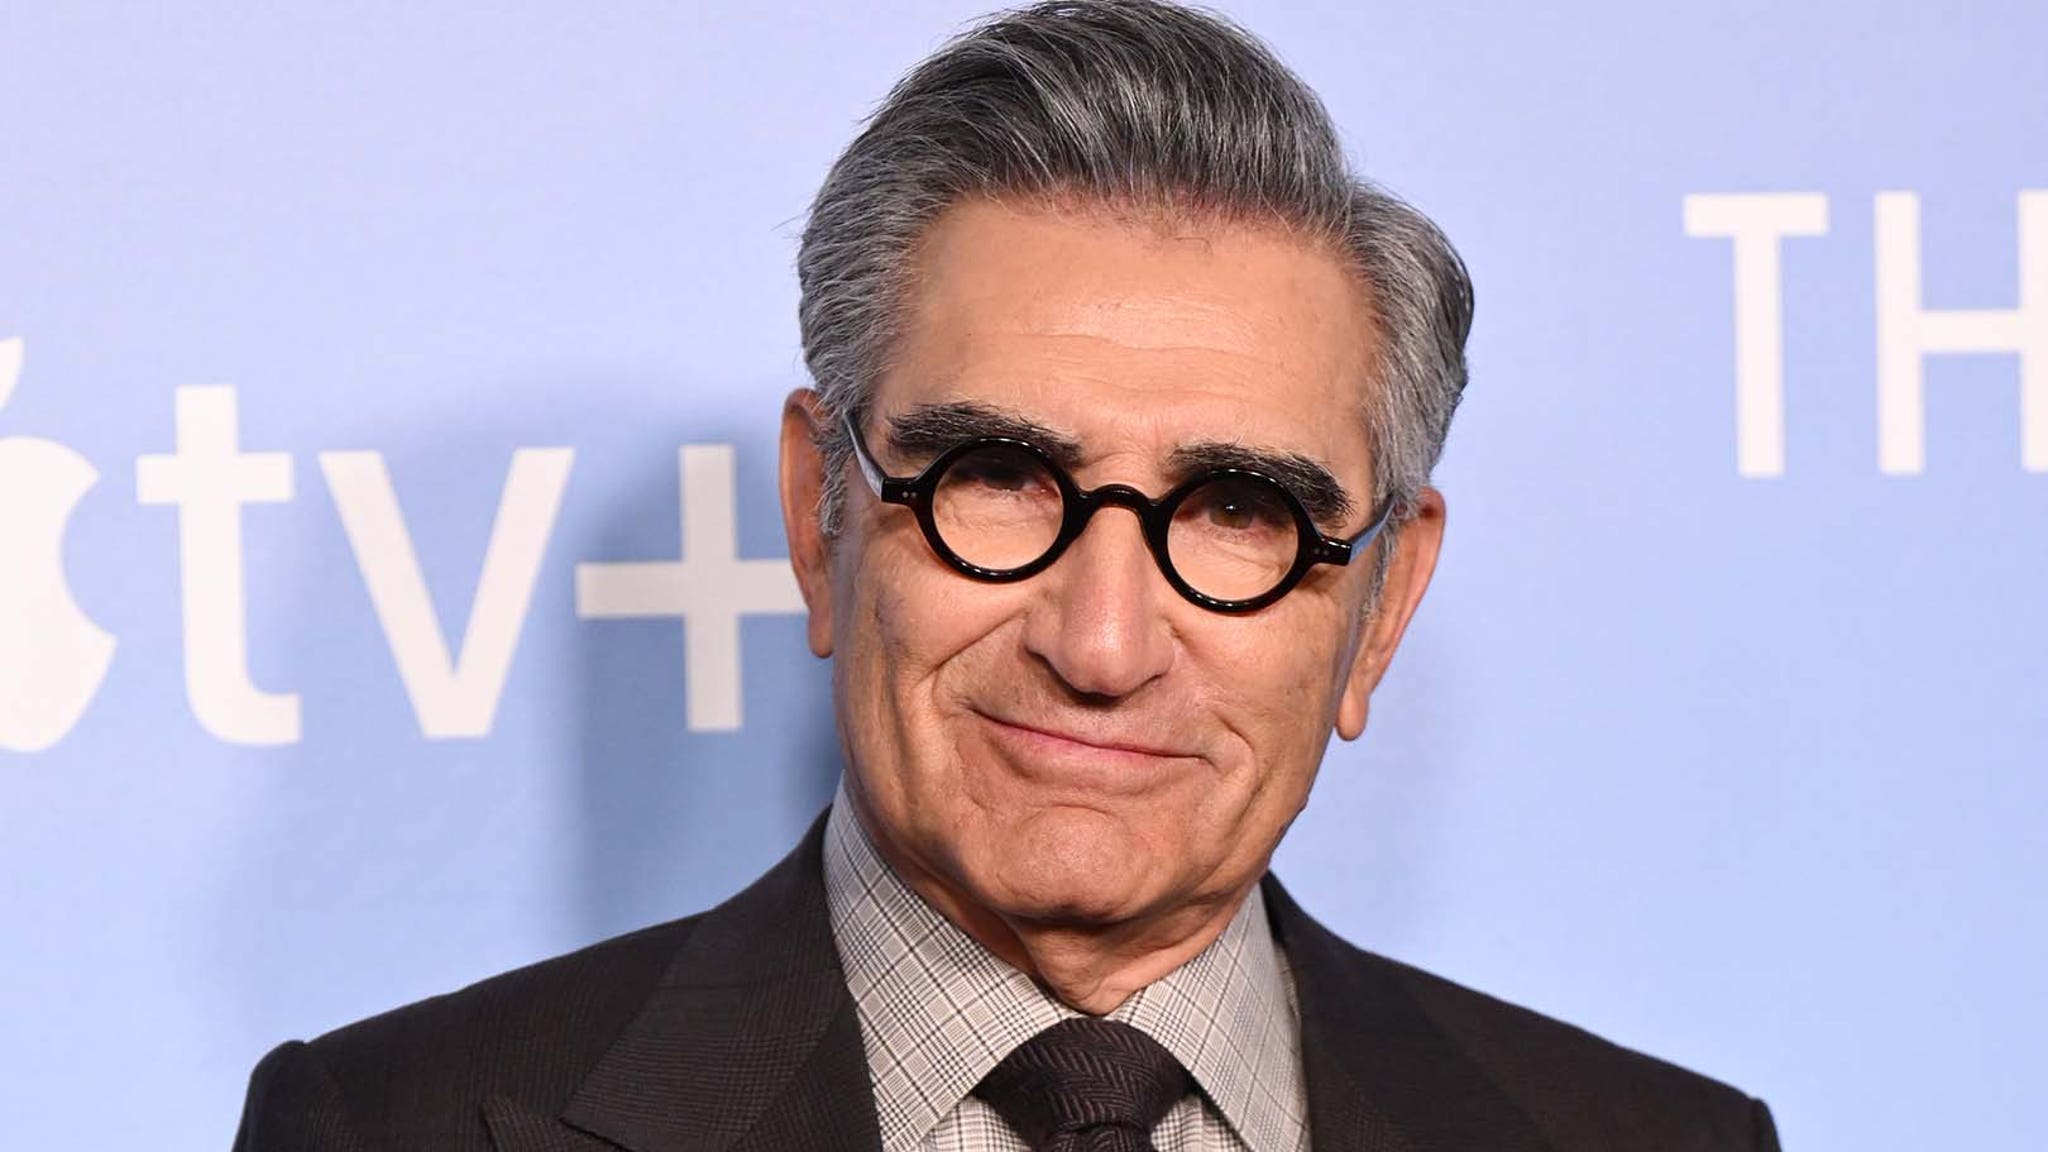 Eugene Levy Says Being Recognized for American Pie Meant Lots of Apple Pie